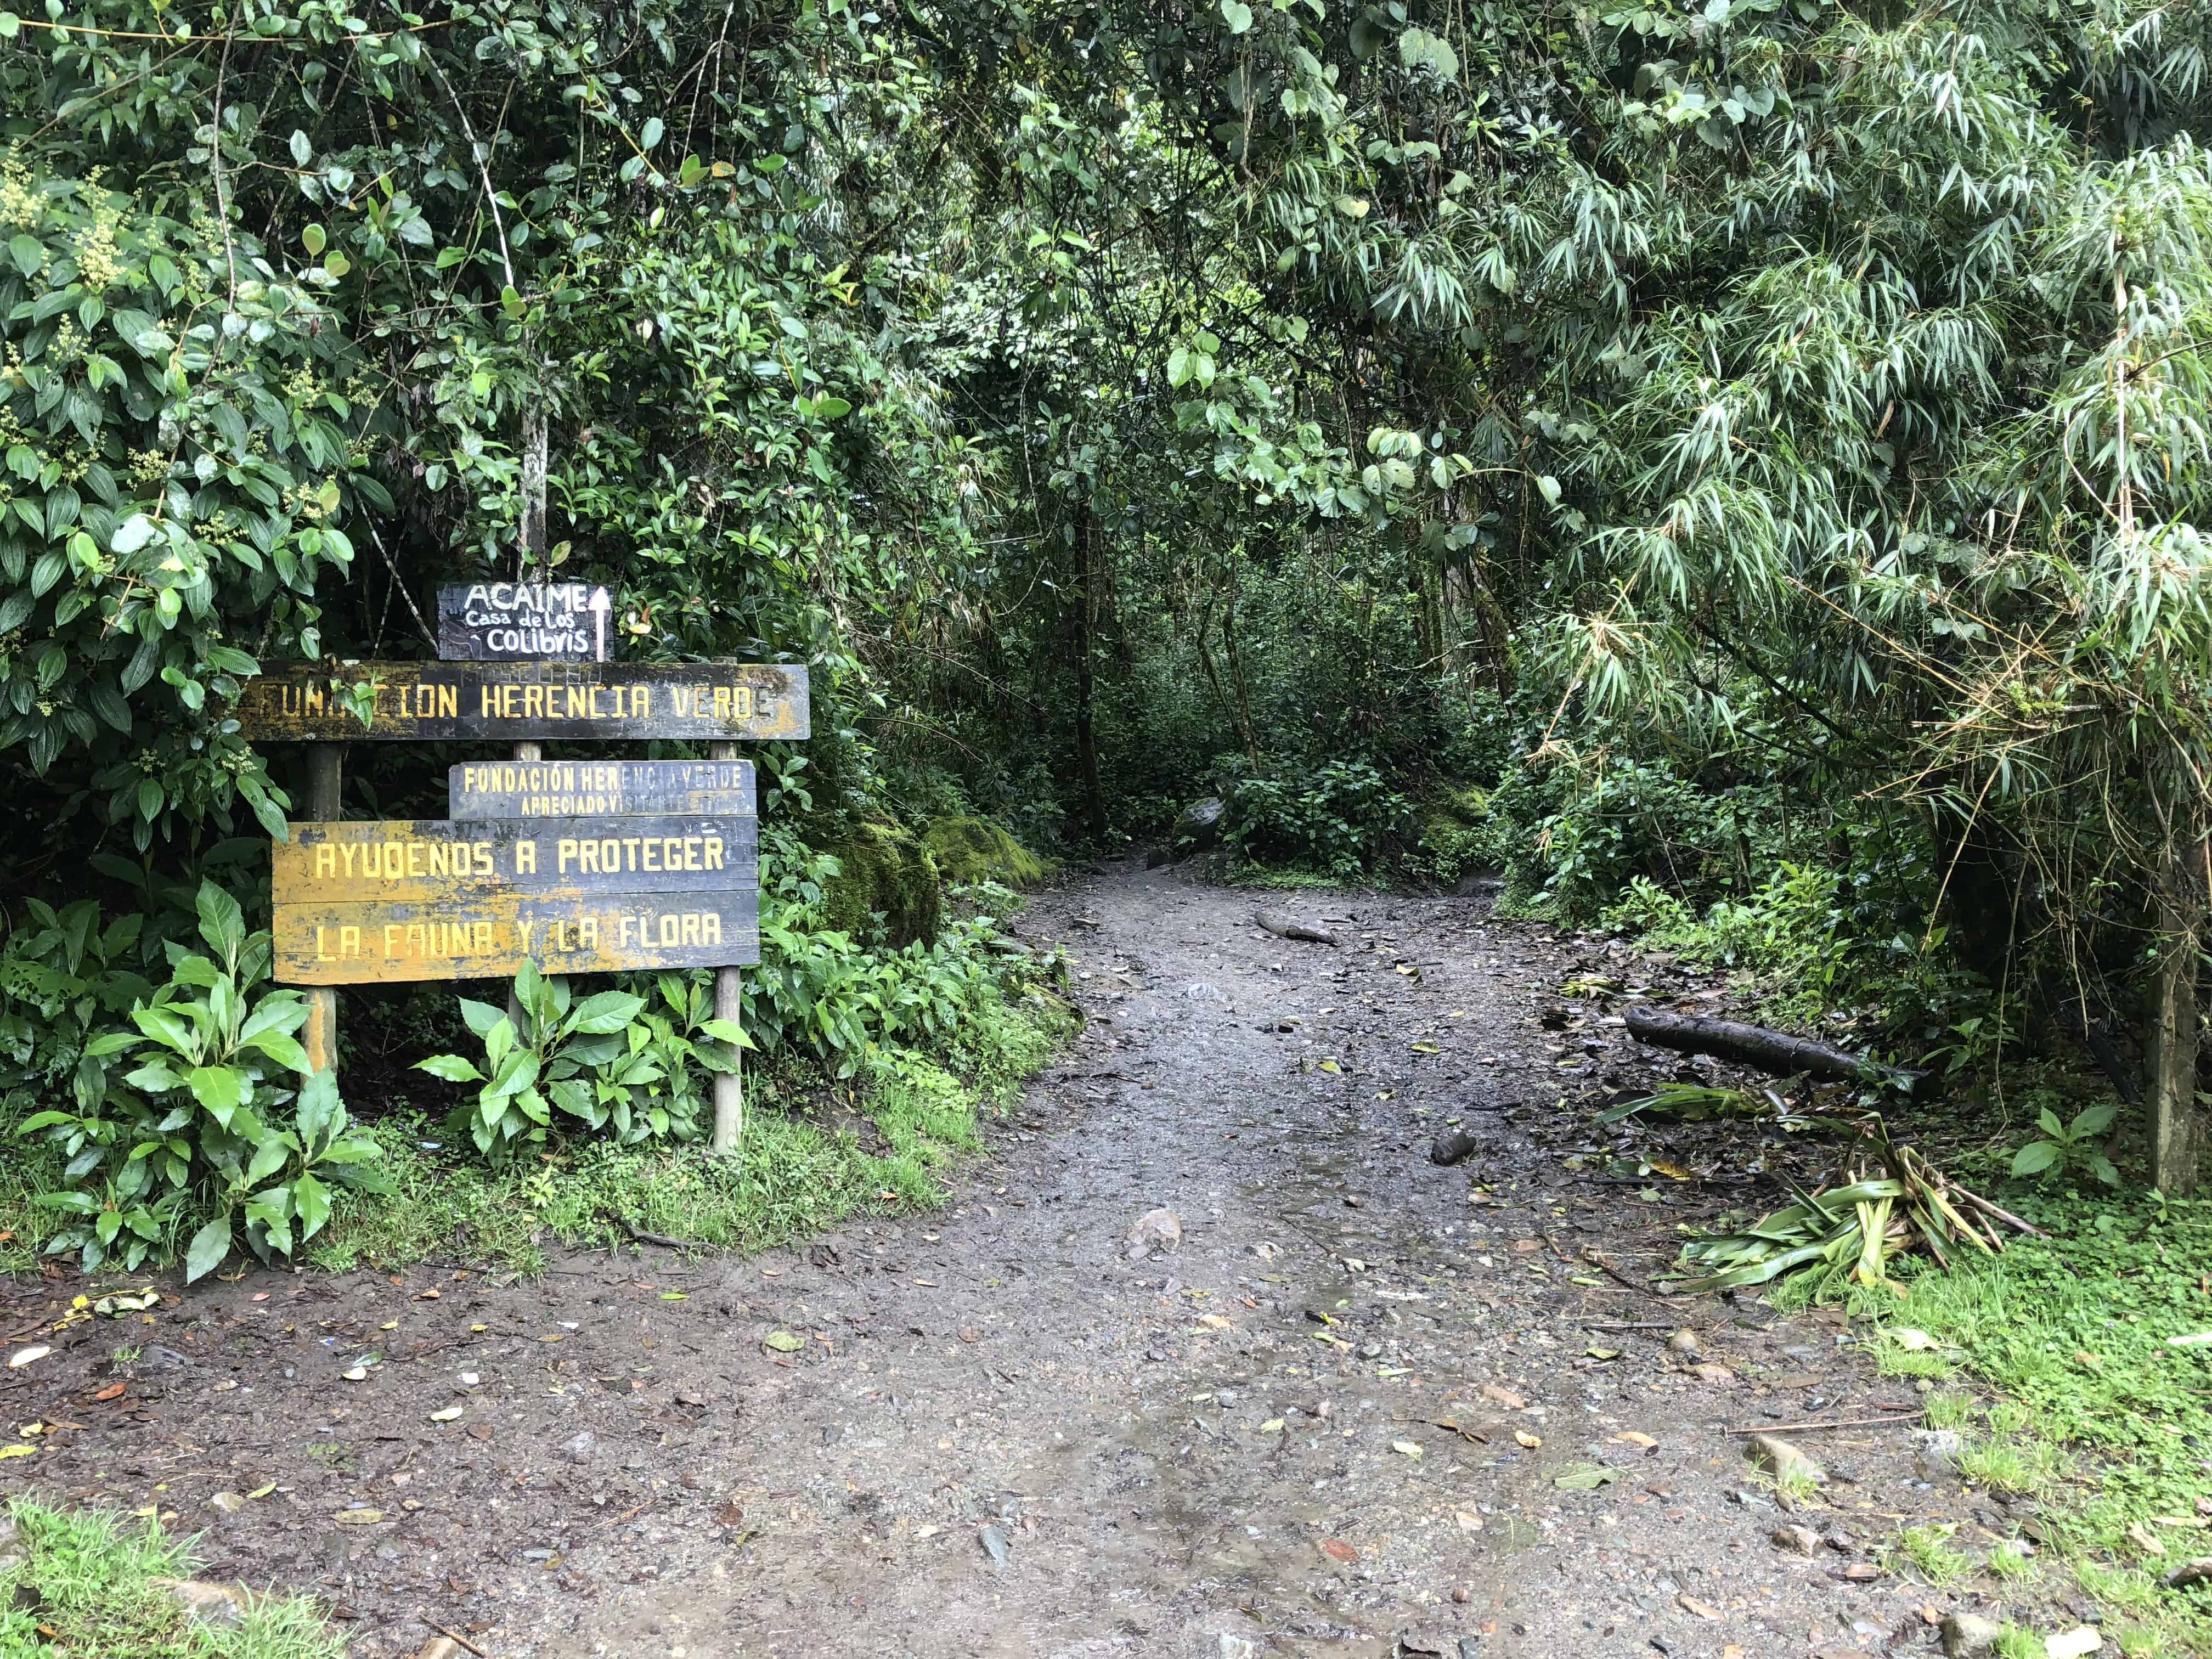 The entrance to the forest at Cocora Valley in Quindío, Colombia